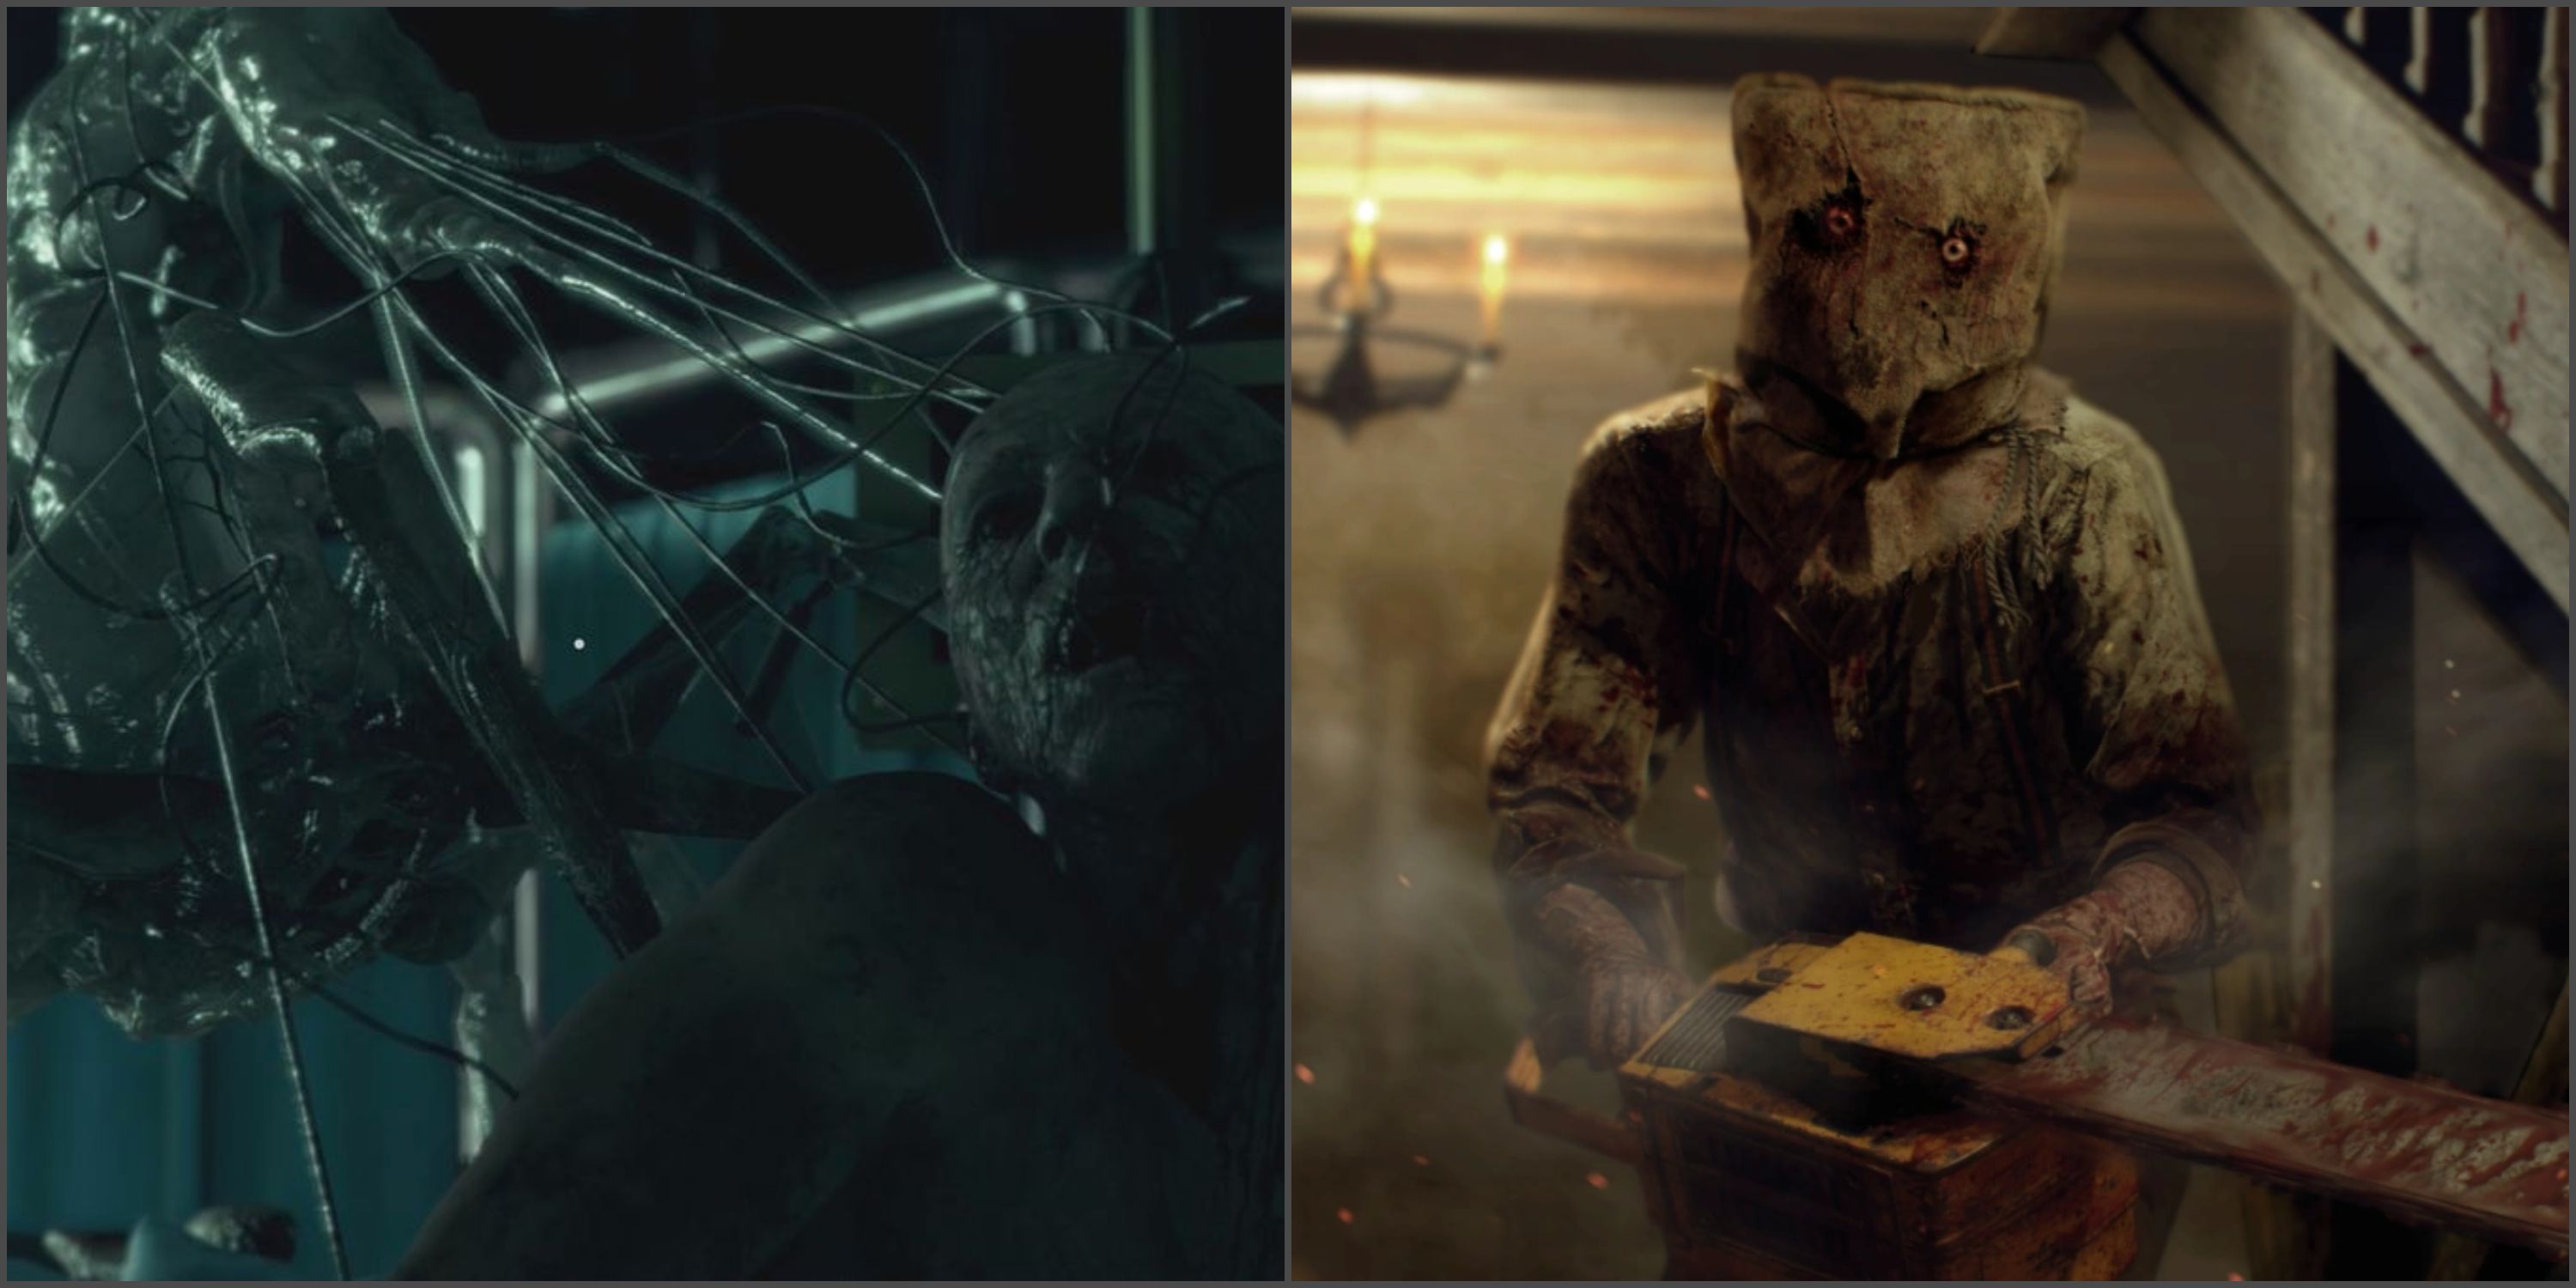 RE4 Remake: An Arana attached to a test subject & the Chainsaw Man enemy